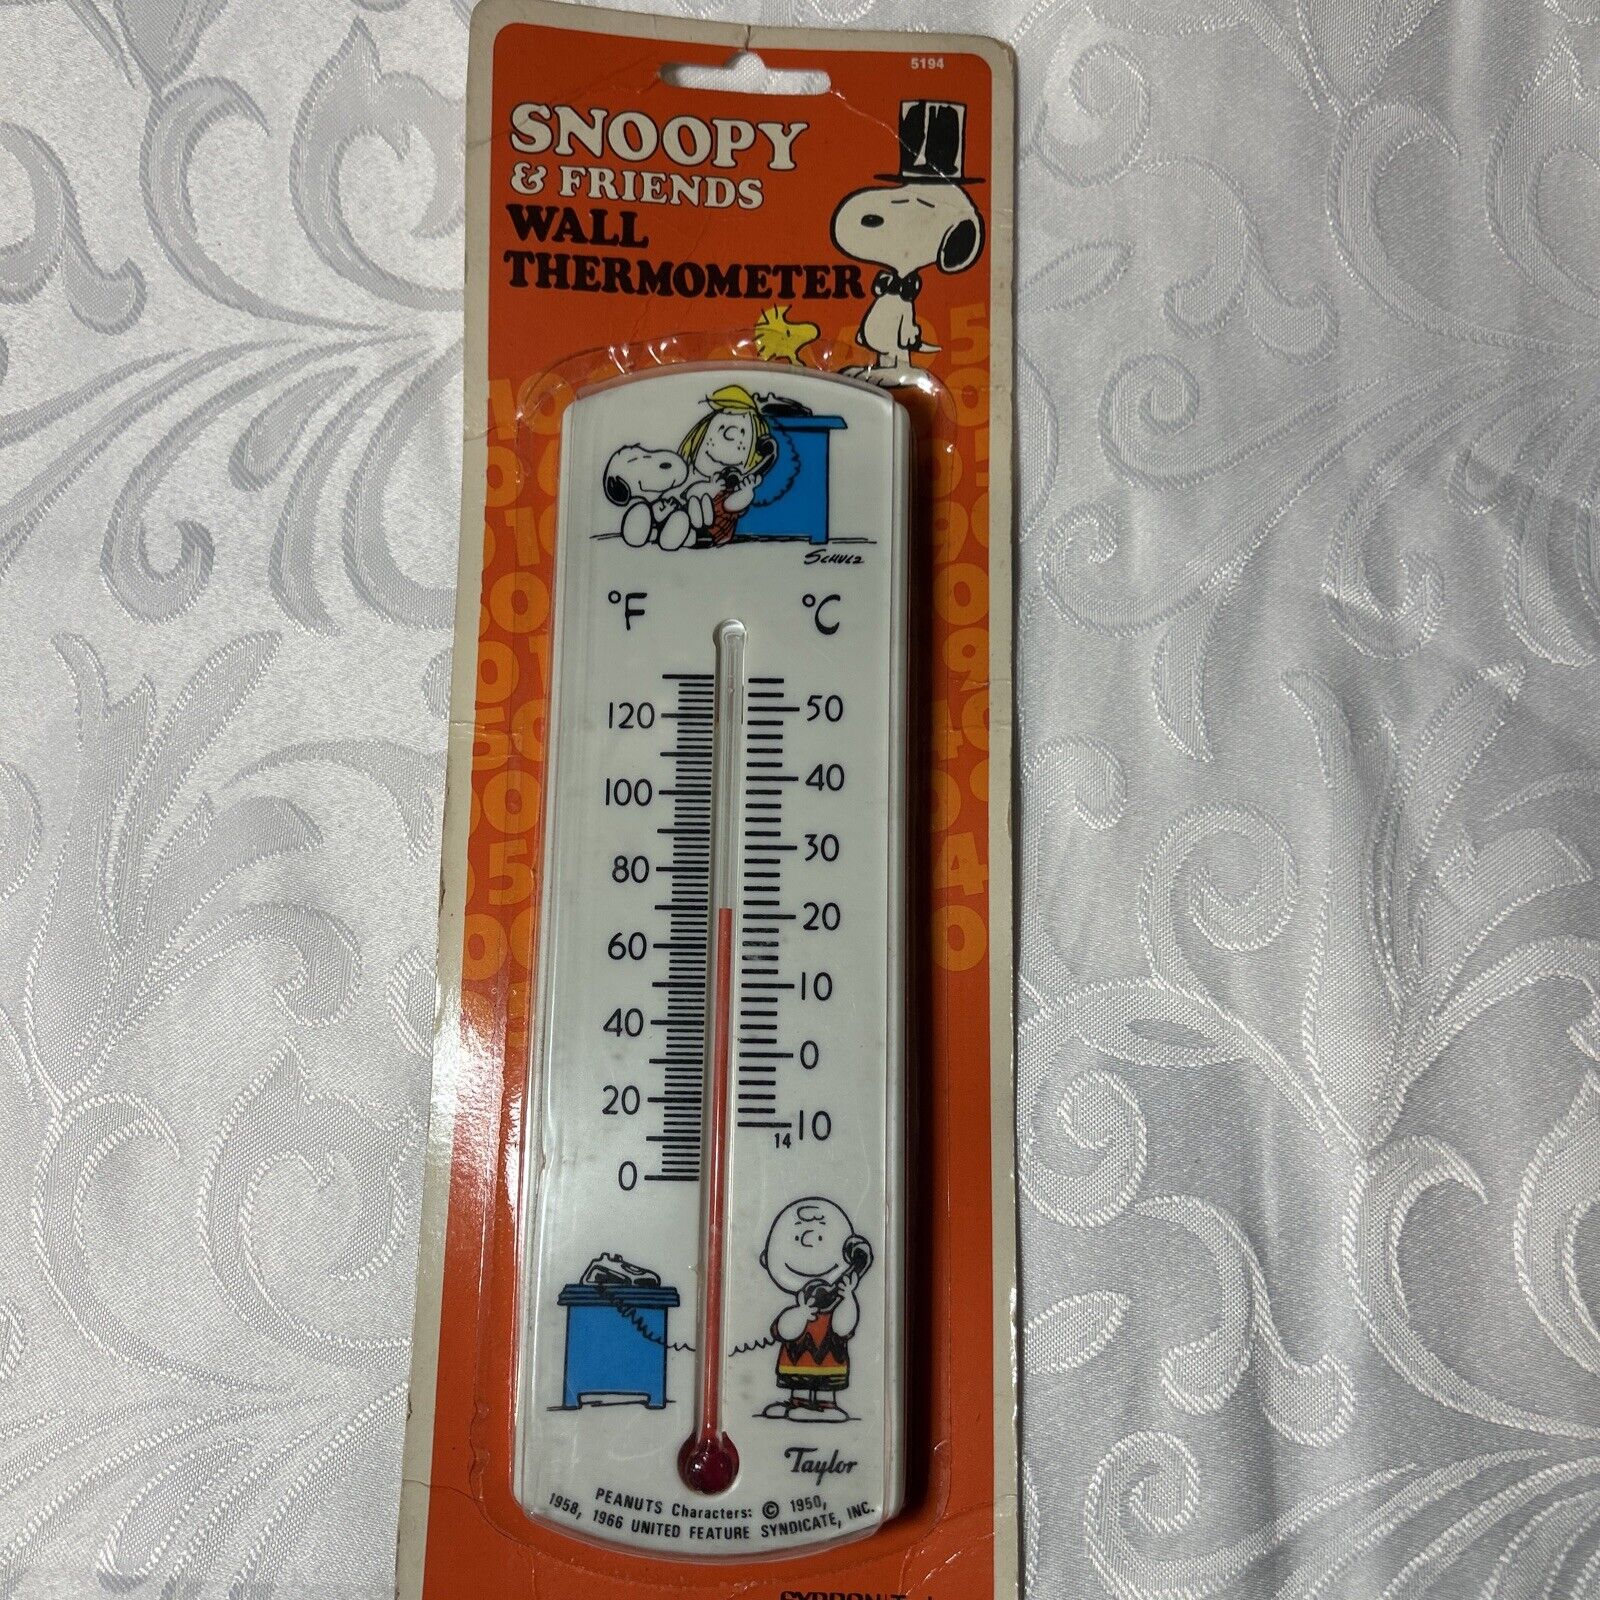 Vintage Peanuts Charlie Brown Snoopy & Friends Taylor Wall Thermometer New